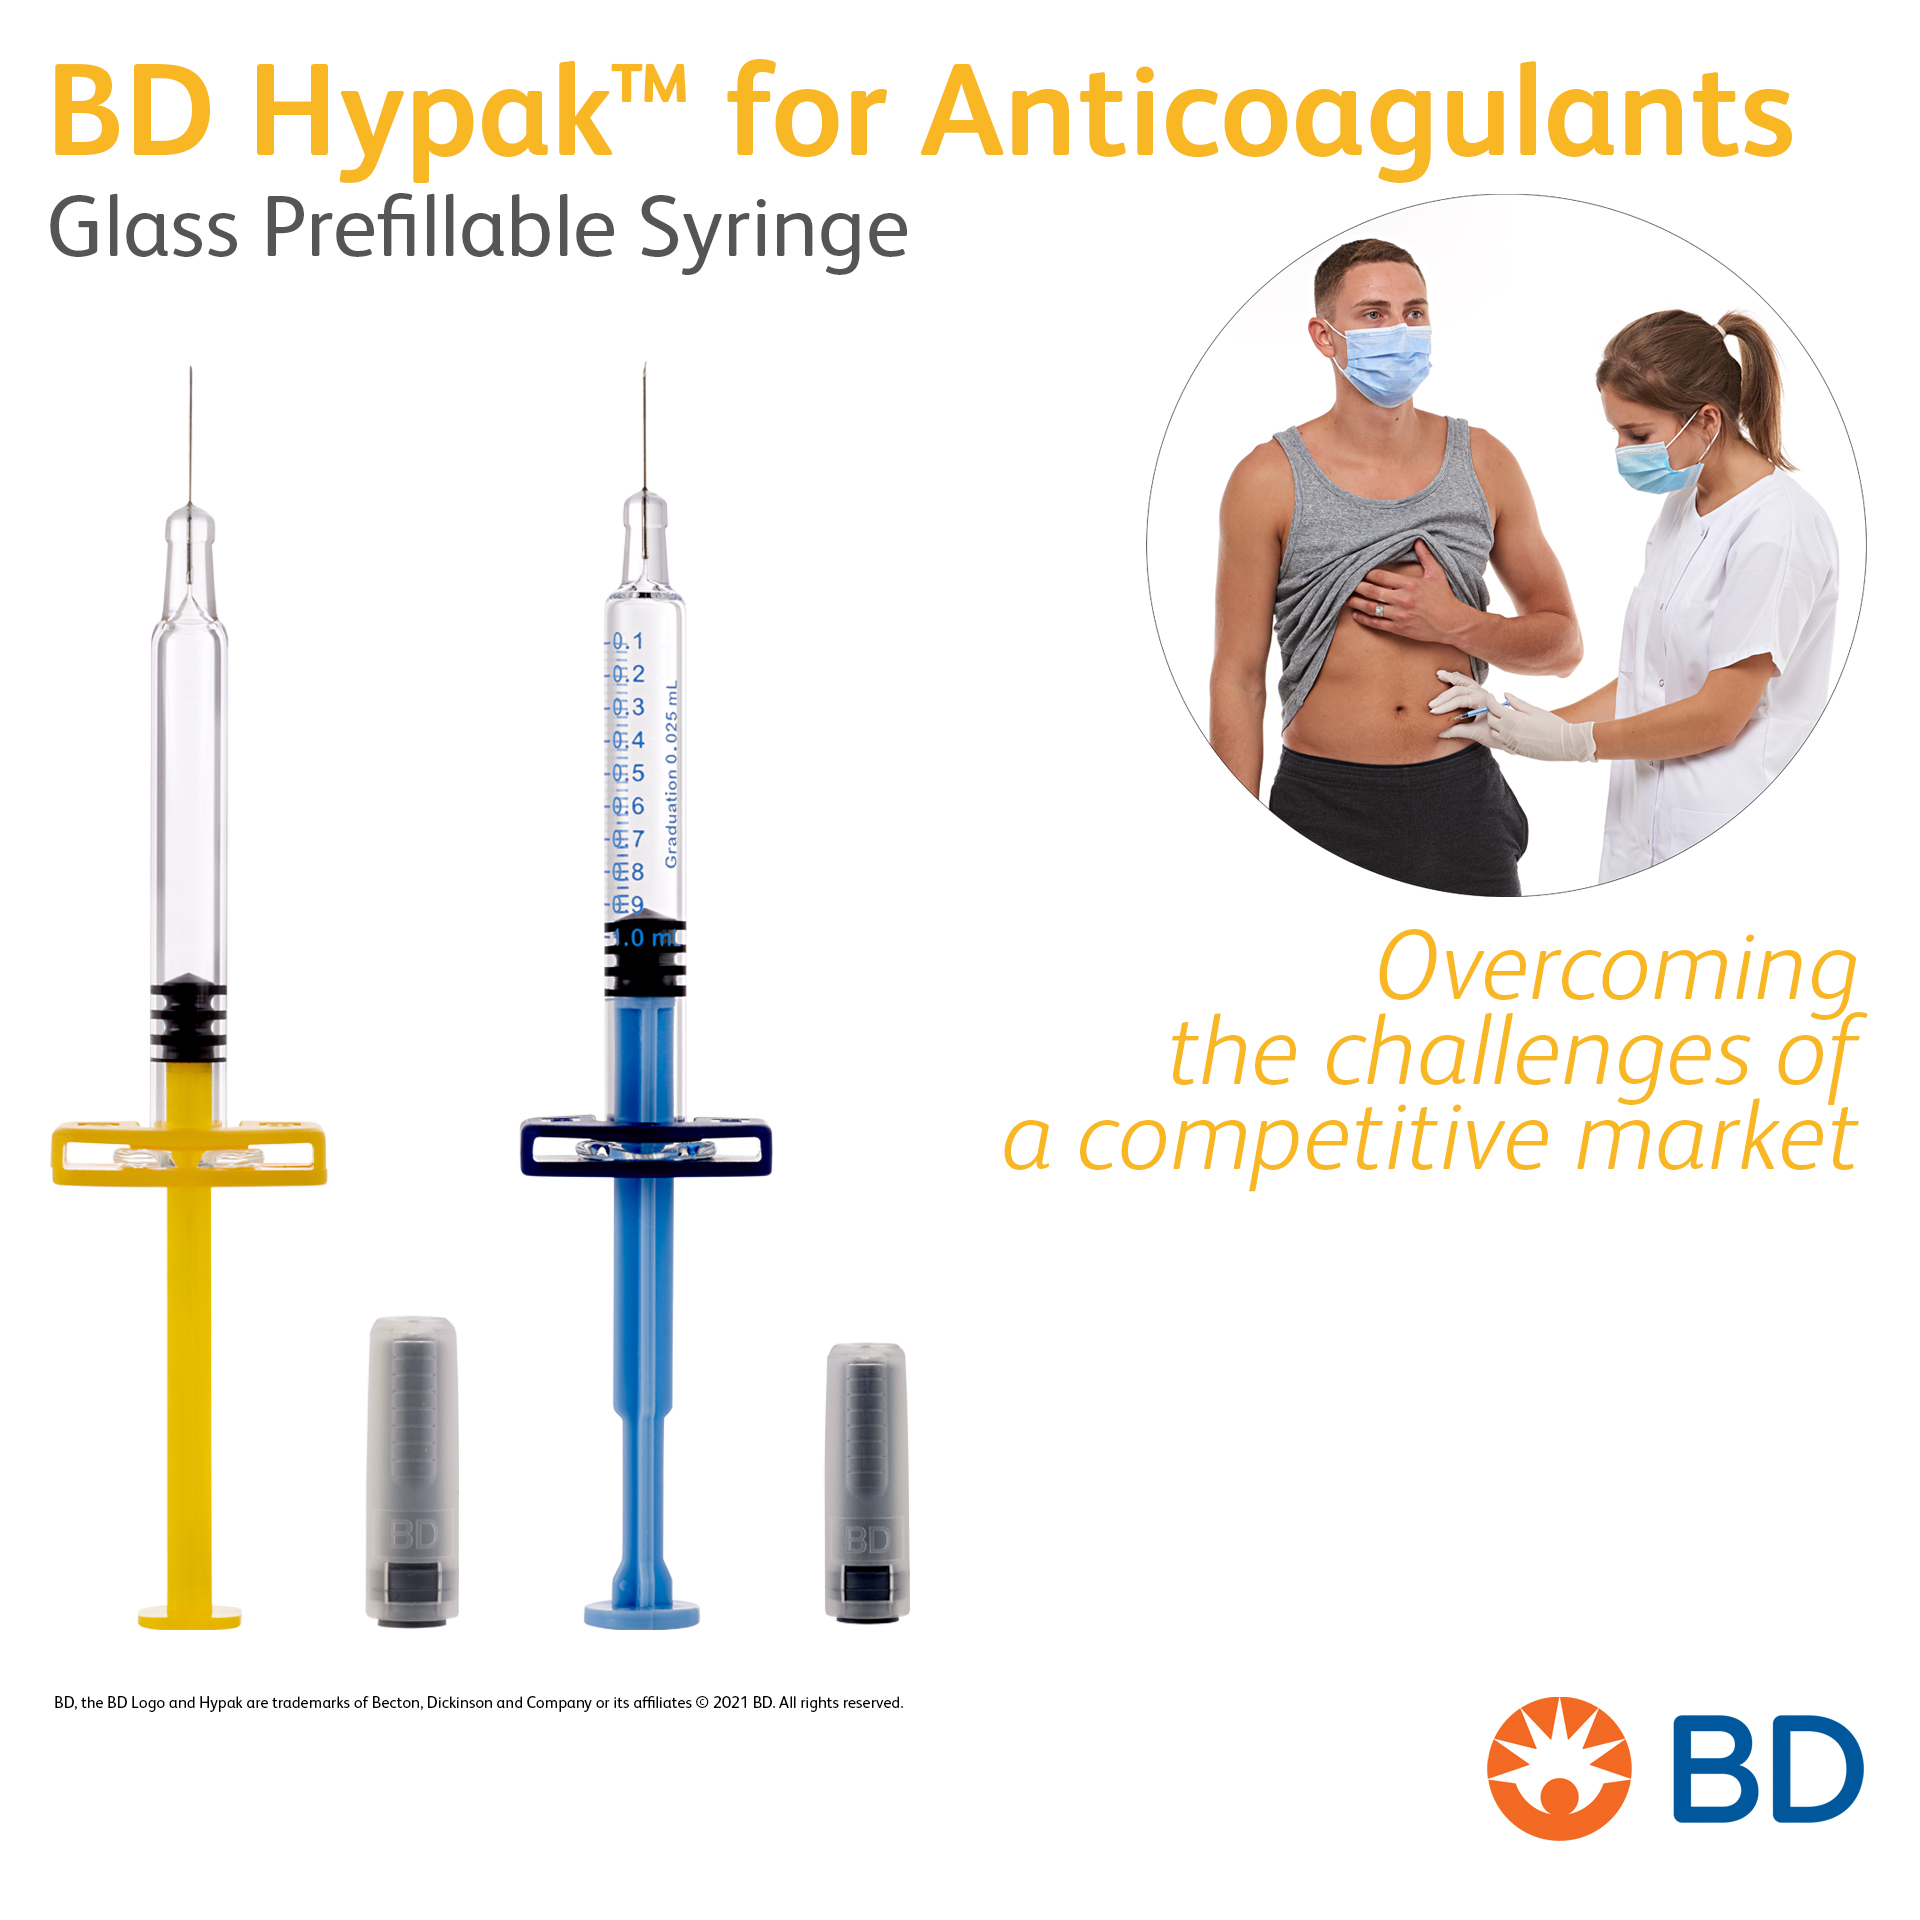 BD Hypak™ for Anticoagulants Glass Prefillable Syringe - Overcoming the challenges of a competitive market